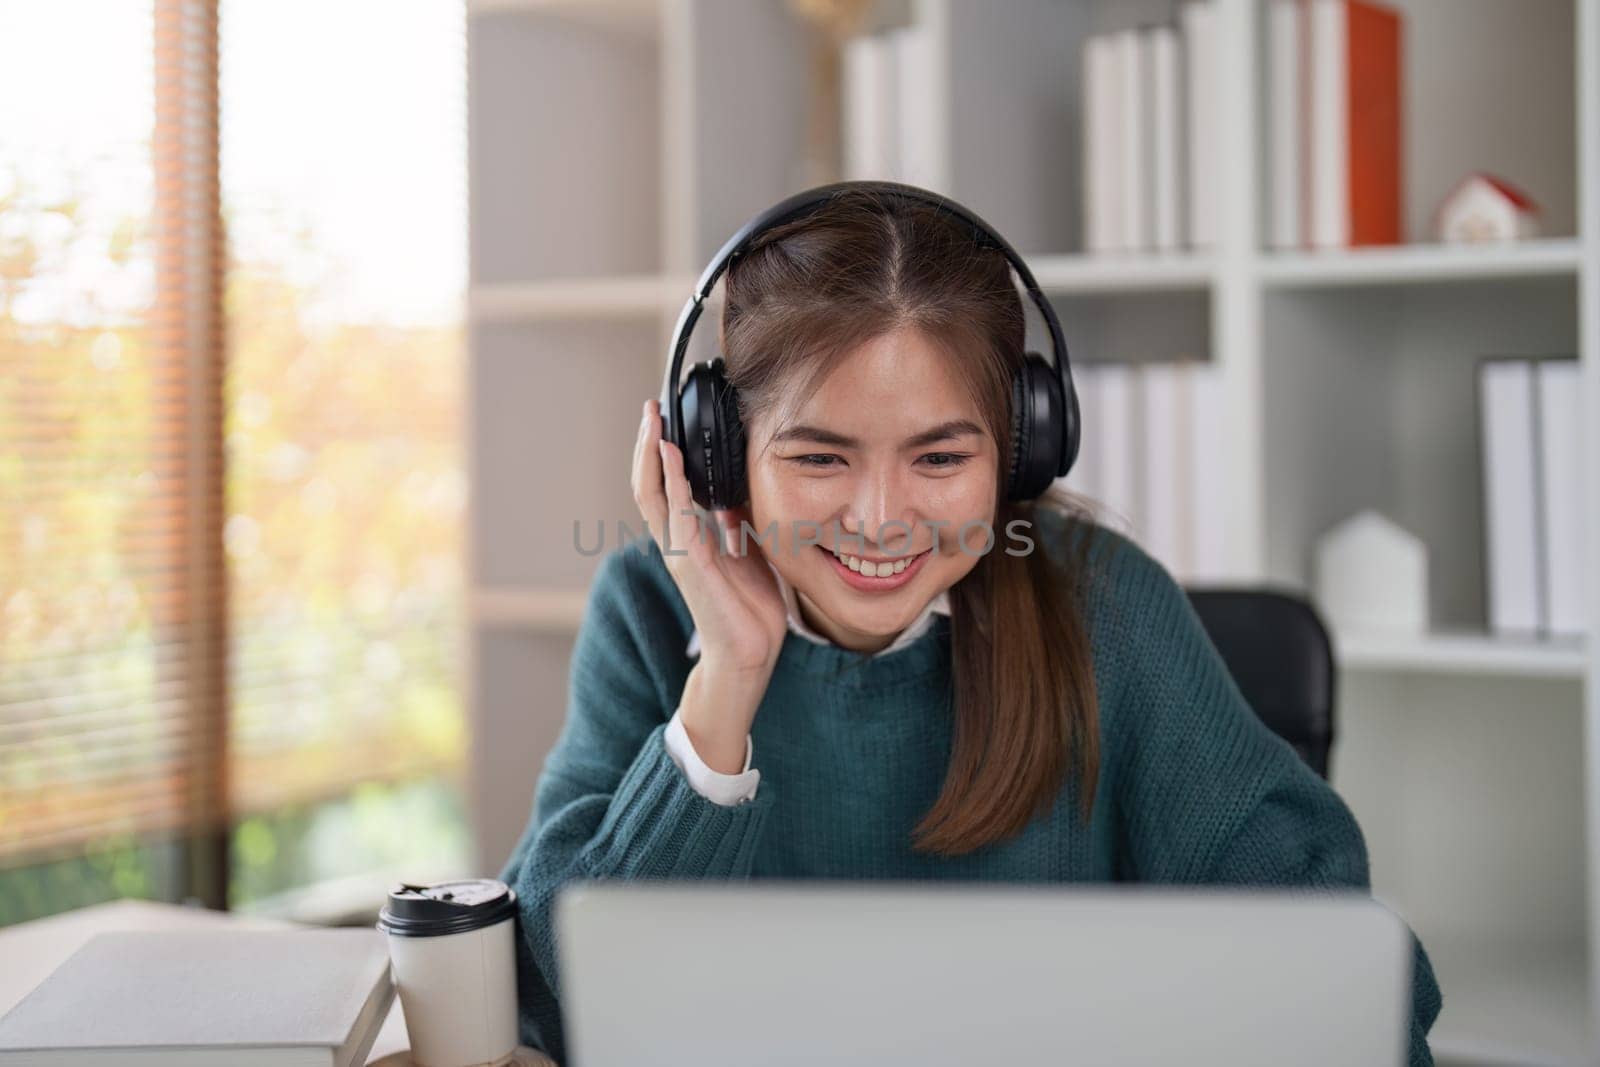 Young woman wearing headphones and smiling while using a laptop in a home office.